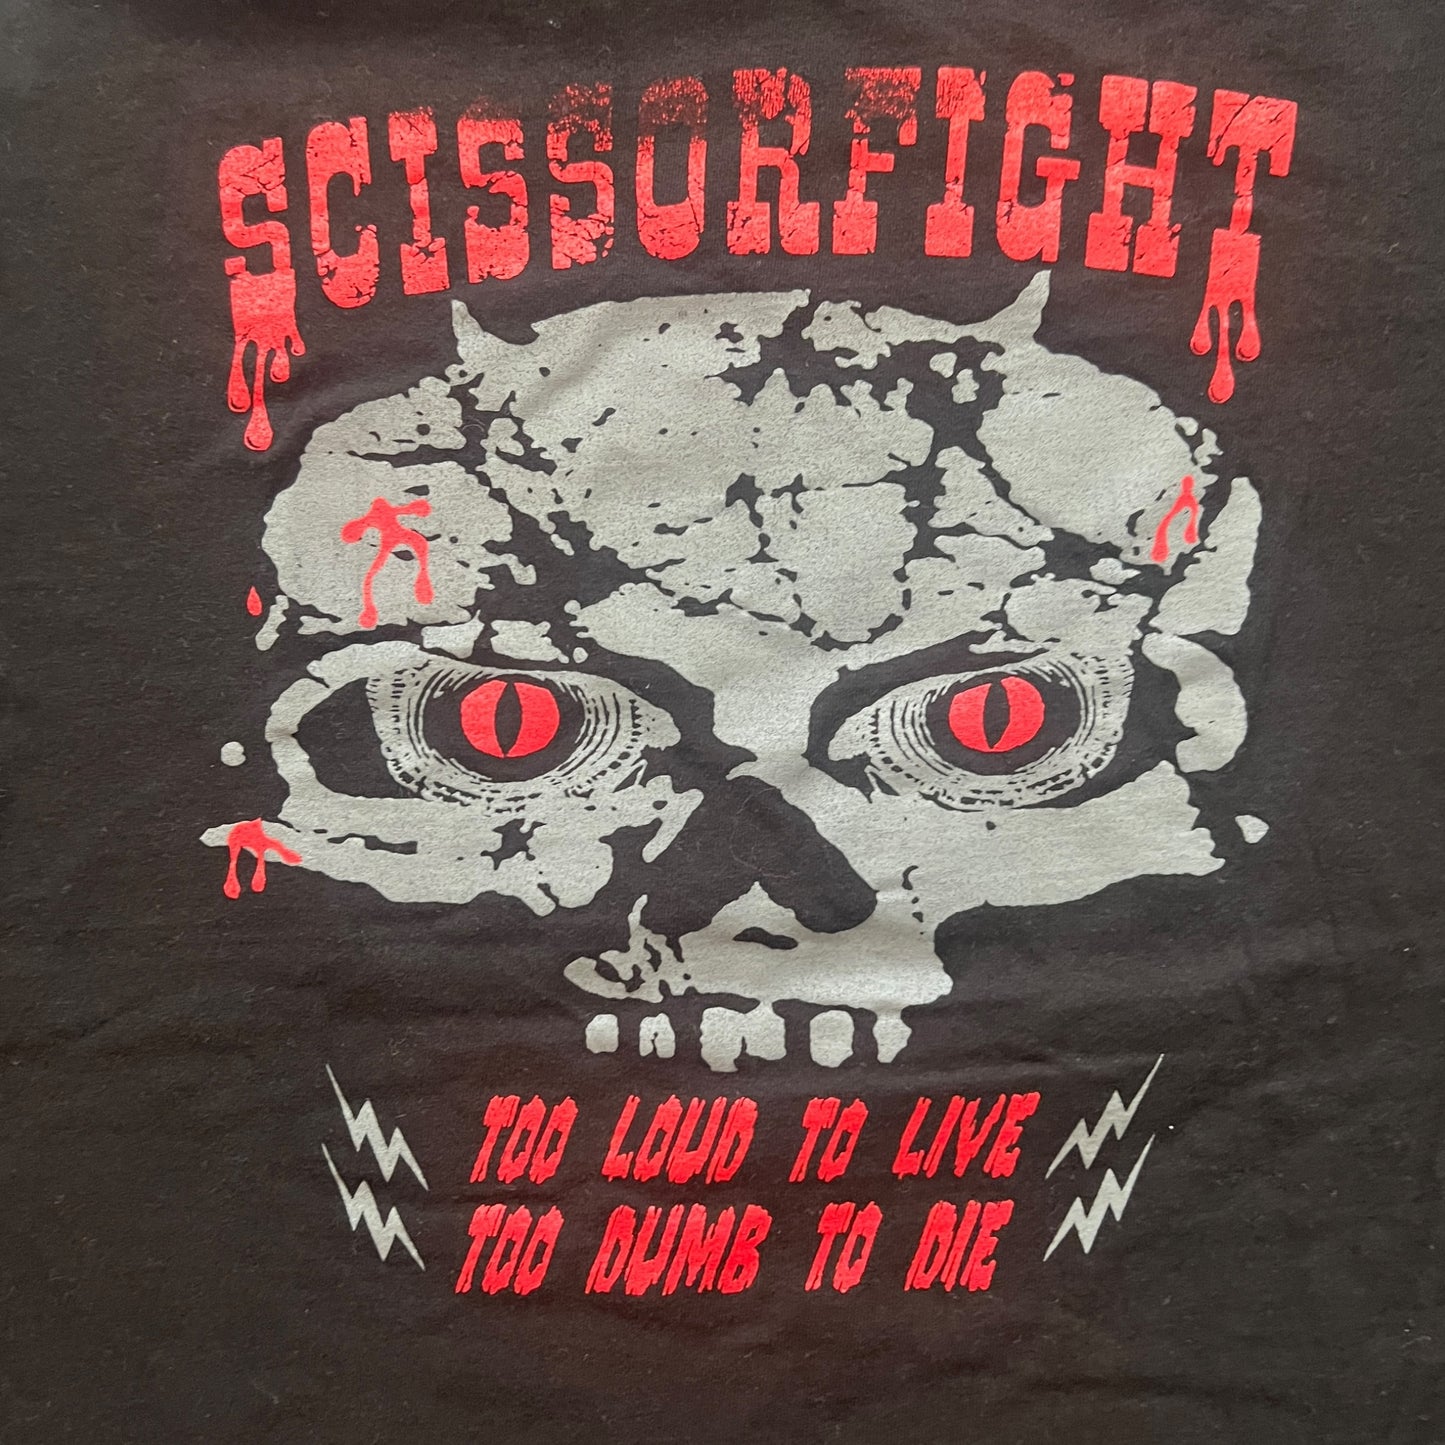 Scissorfight Band Too Loud To Live Too Dumb To Die T-Shirt Size Medium